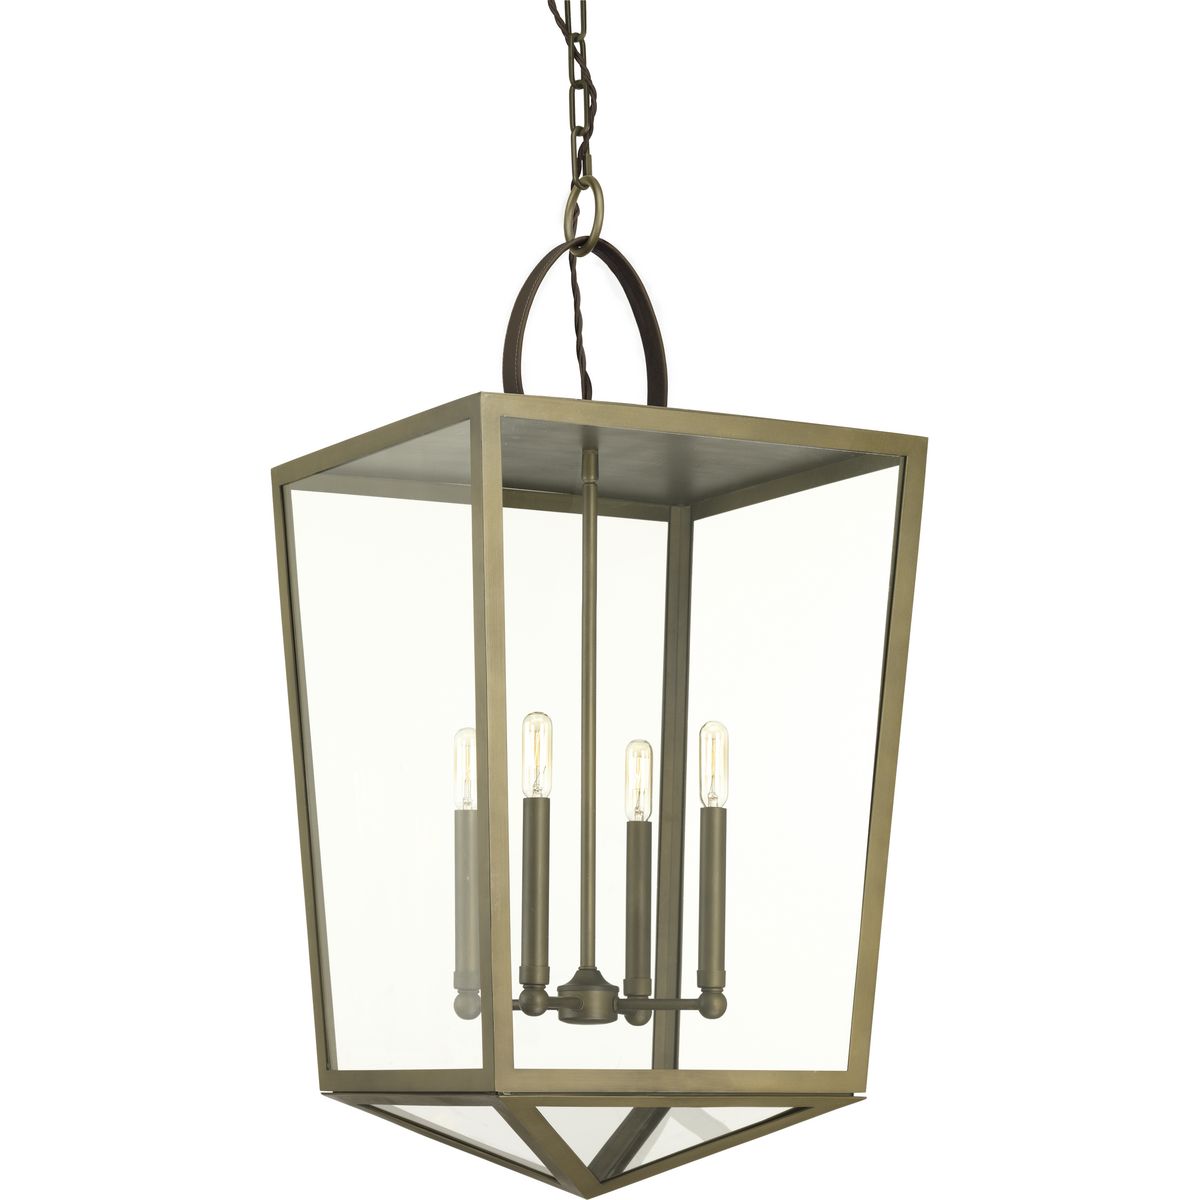 The Shearwater series embodies designer Jeffrey Alan Mark�s love of easy coastal living. With true California style, the Shearwater pendant is an Aged Brass lantern topped with a handsome brown topstitched leather handle. Clear glass shades surround a four-light candelabra to complete the look. This family of fixtures is part of the Jeffrey Alan Marks Point Dume� lighting collection which celebrates a curated mix of yesterday and today, distilling both industrial and artisanal influences.